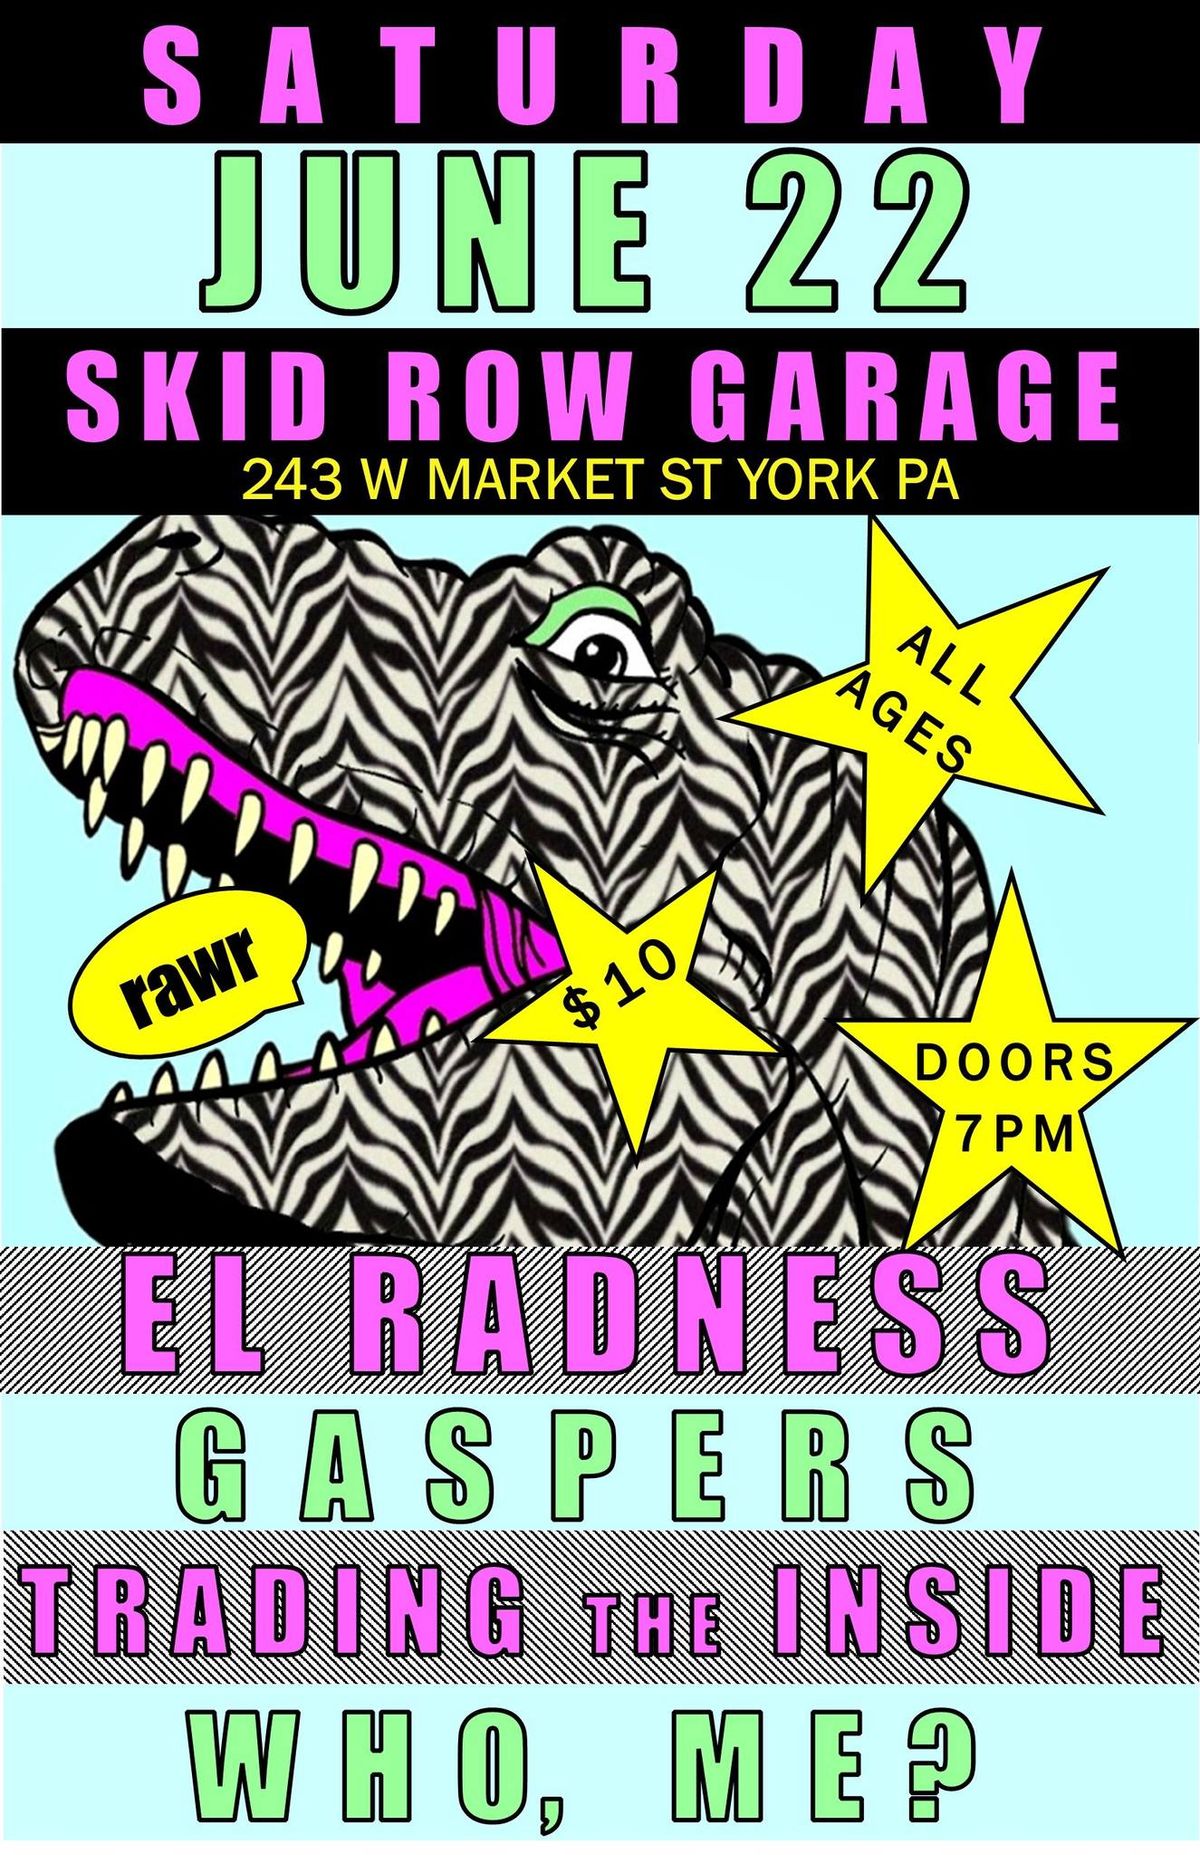 El Radness, Gaspers, Trading the Inside and Who, Me? at Skid Row Garage